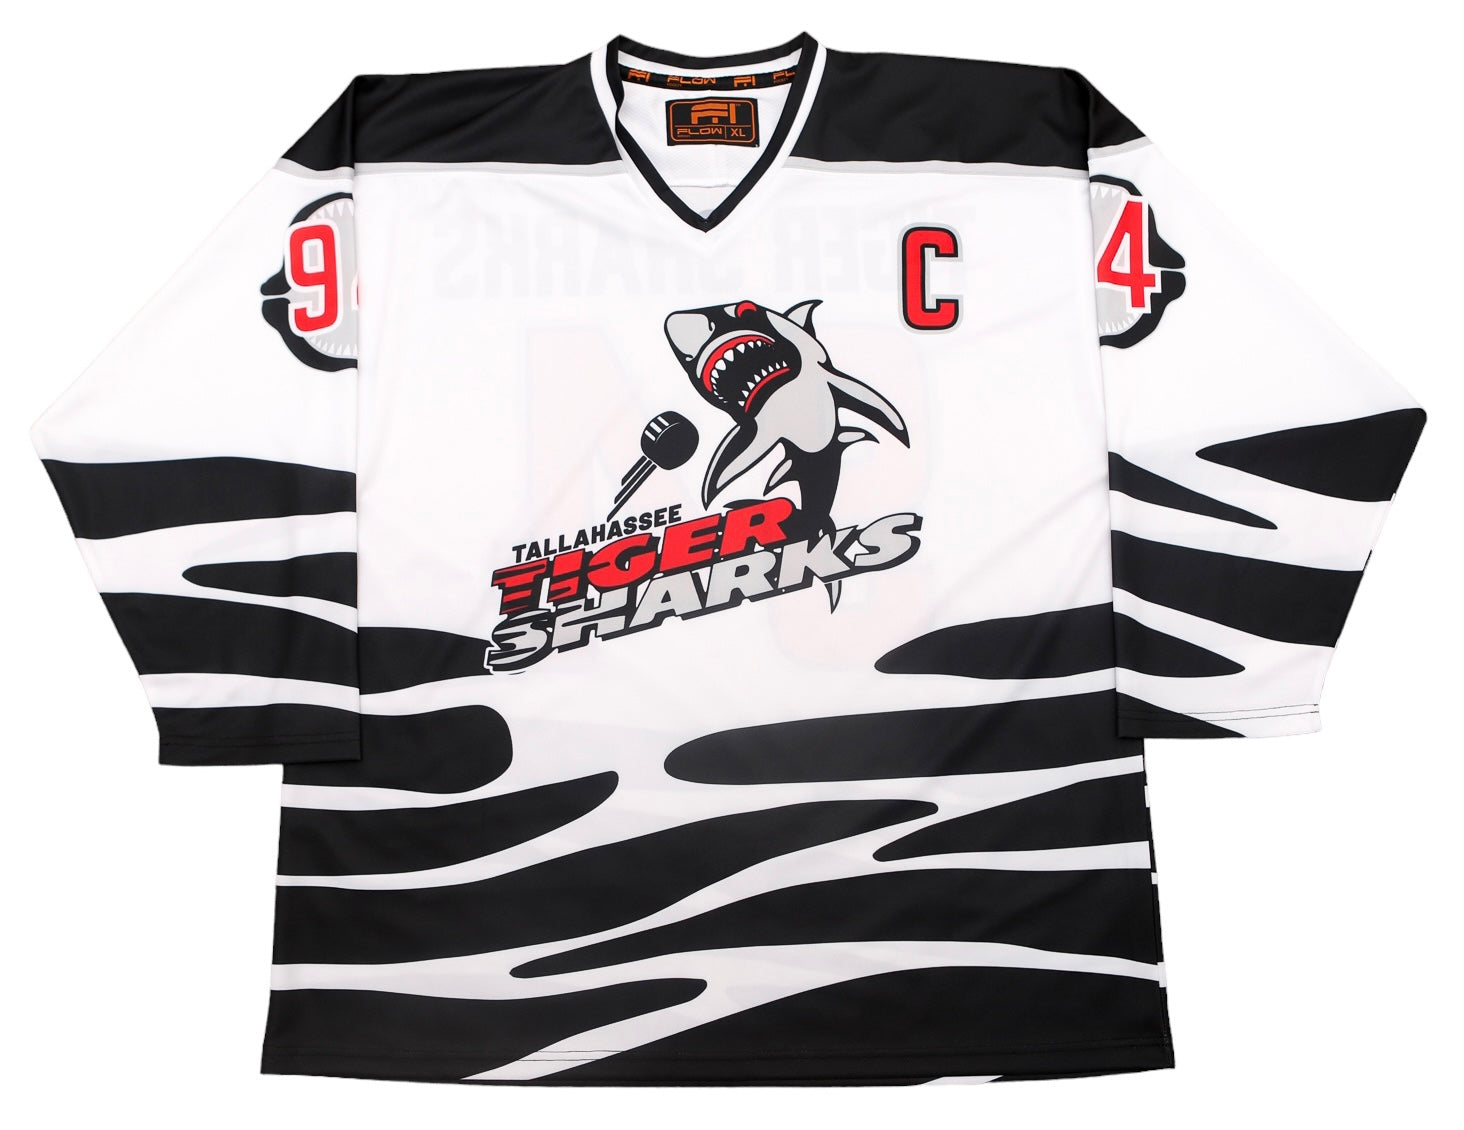 Customized Vintage Ducks Ice Hockey Jersey Adult and Youth Sizes